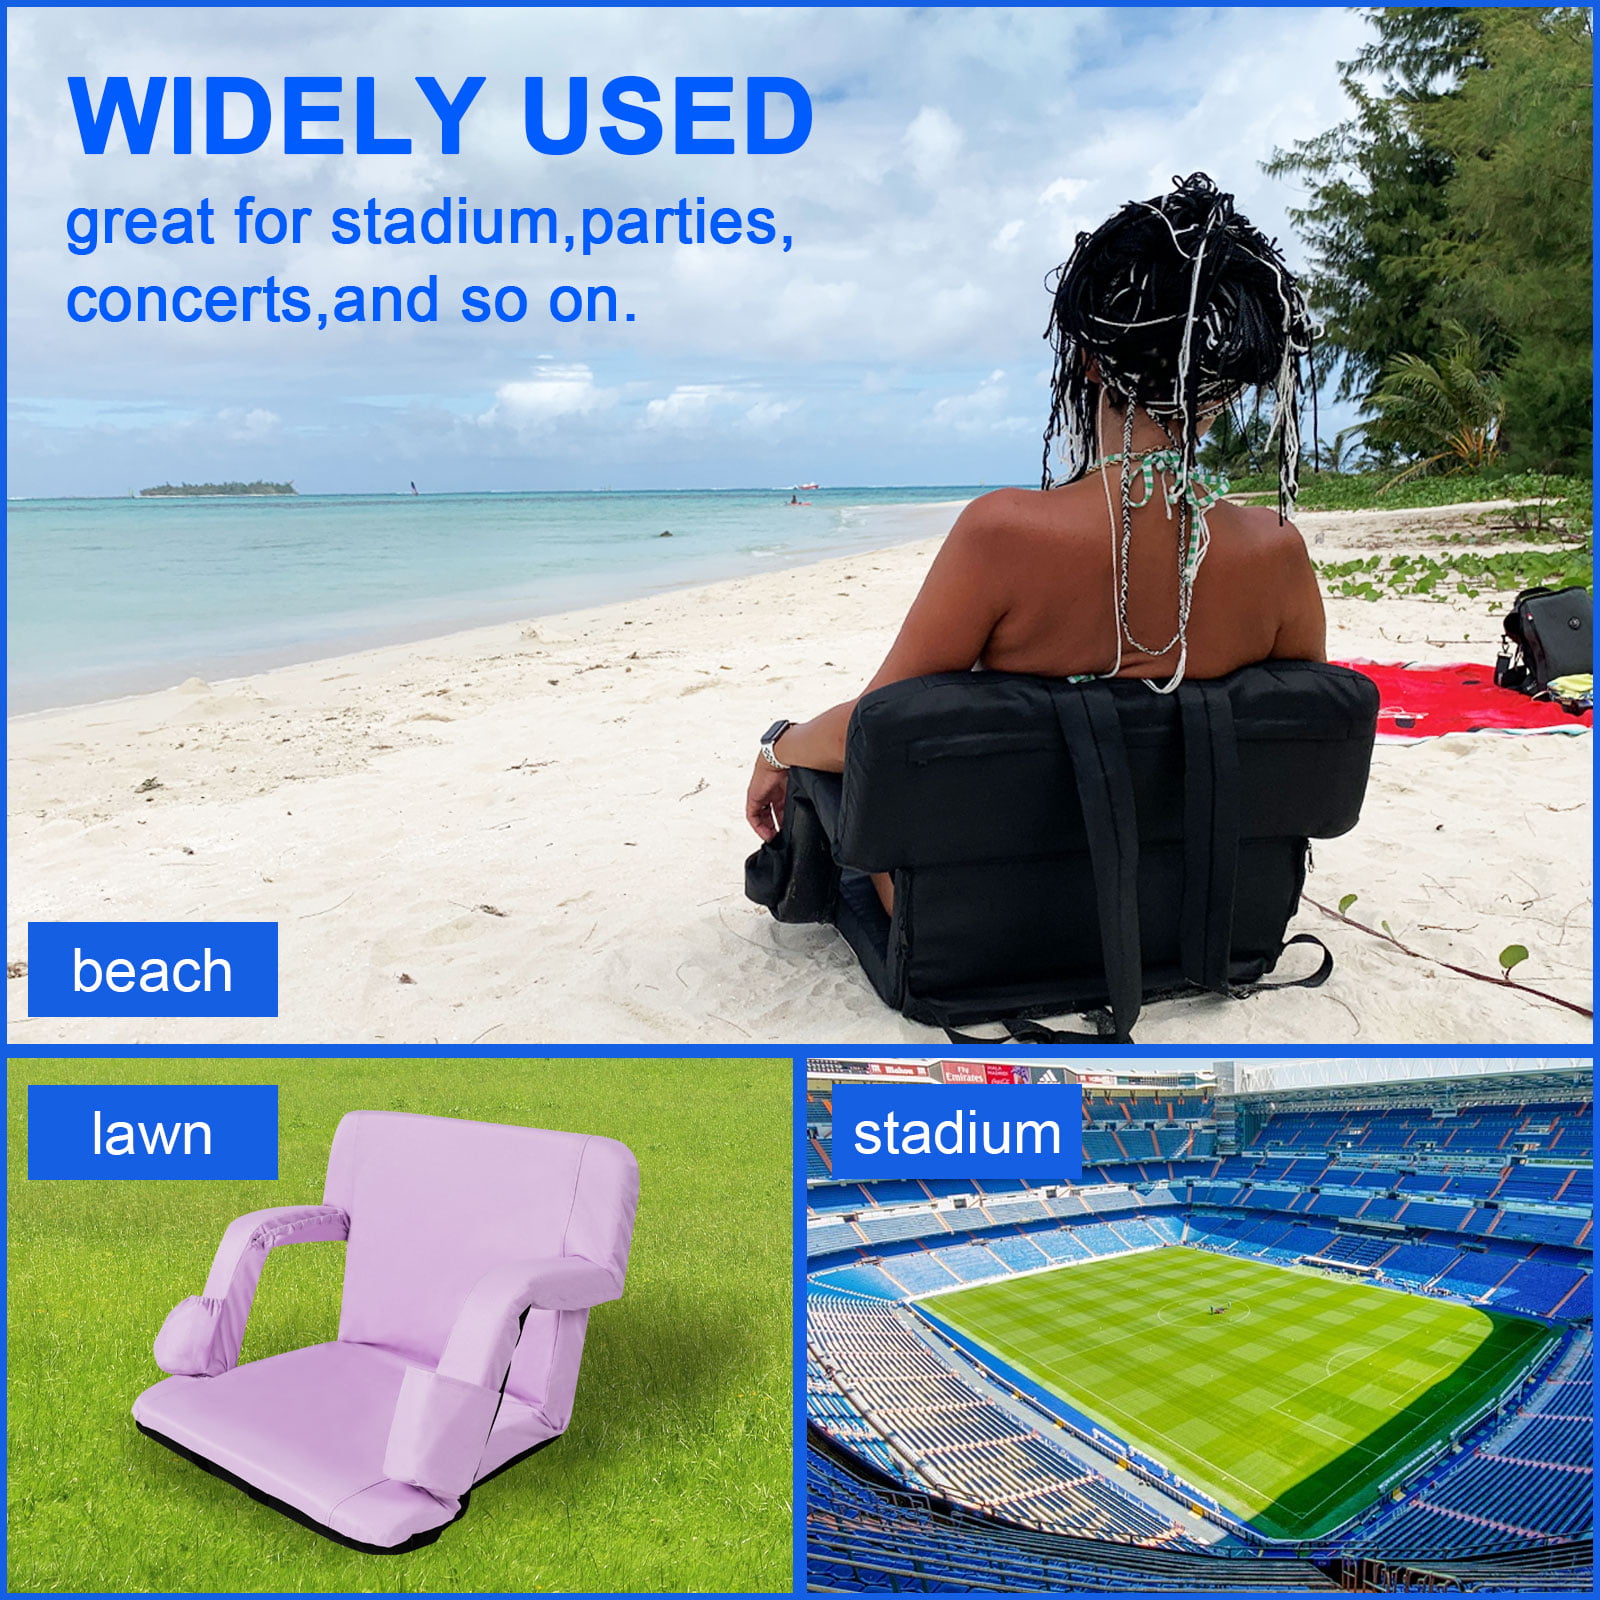  Sportneer Stadium Seats for Teens Adult Men Women, Bleacher  Seats with Backs and Cushion 6 Reclining Positions Folding Stadium Chairs  for Sport Events : Sports & Outdoors